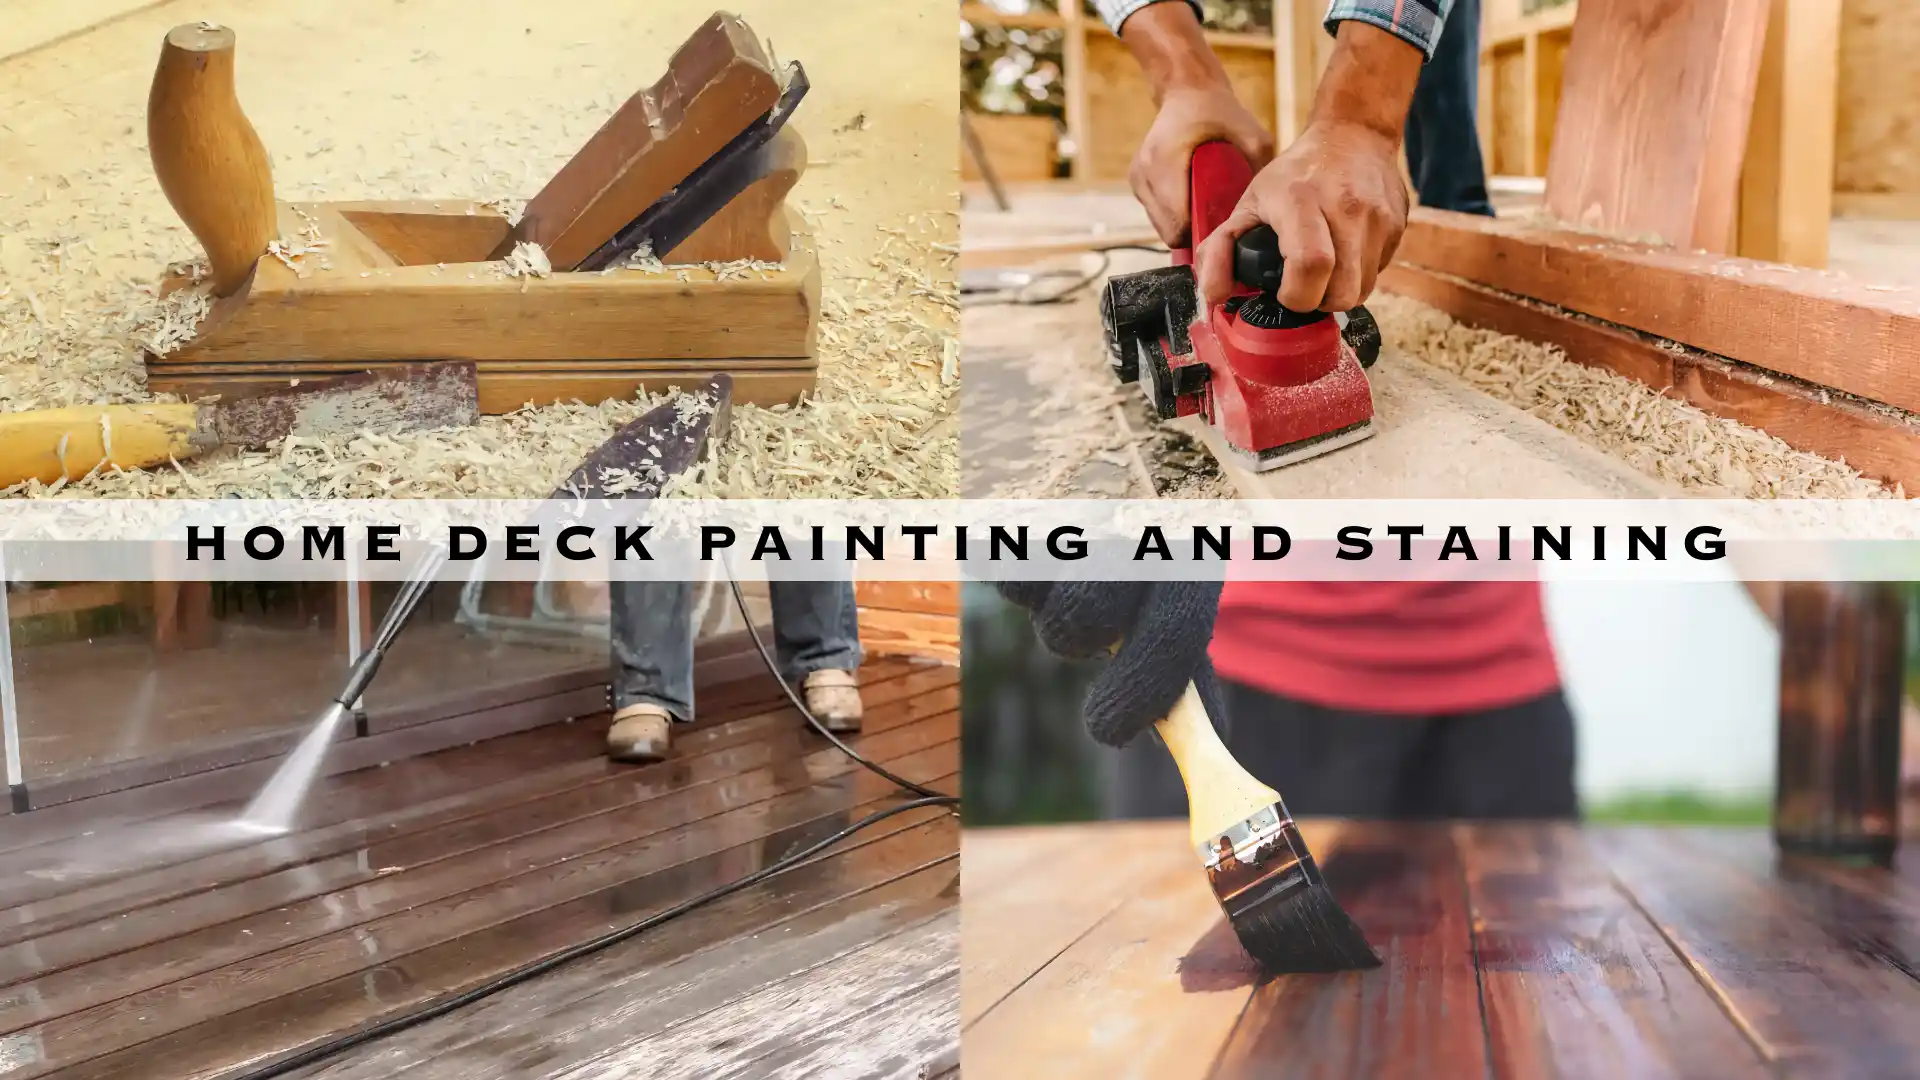 RESIDENTIAL HOME DECK PAINTING AND STAINING